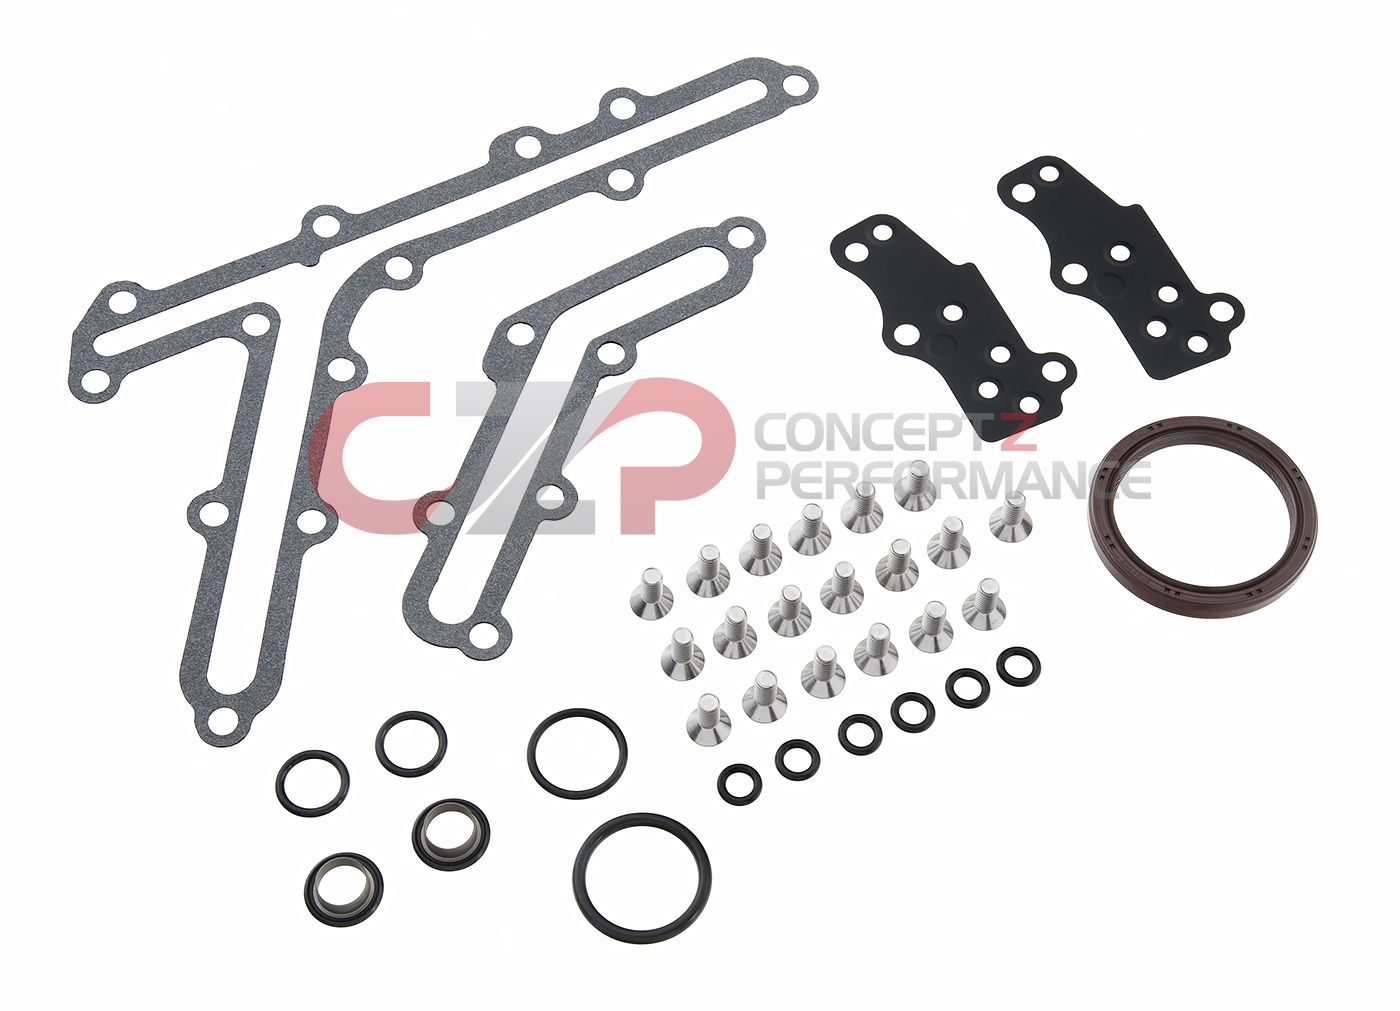 Infiniti OEM / CZP Timing Chain Cover Gasket/O-Ring Seal Kit, VQ35DE Non Rev-Up Engine ONLY - Nissan 350Z / Infiniti G35